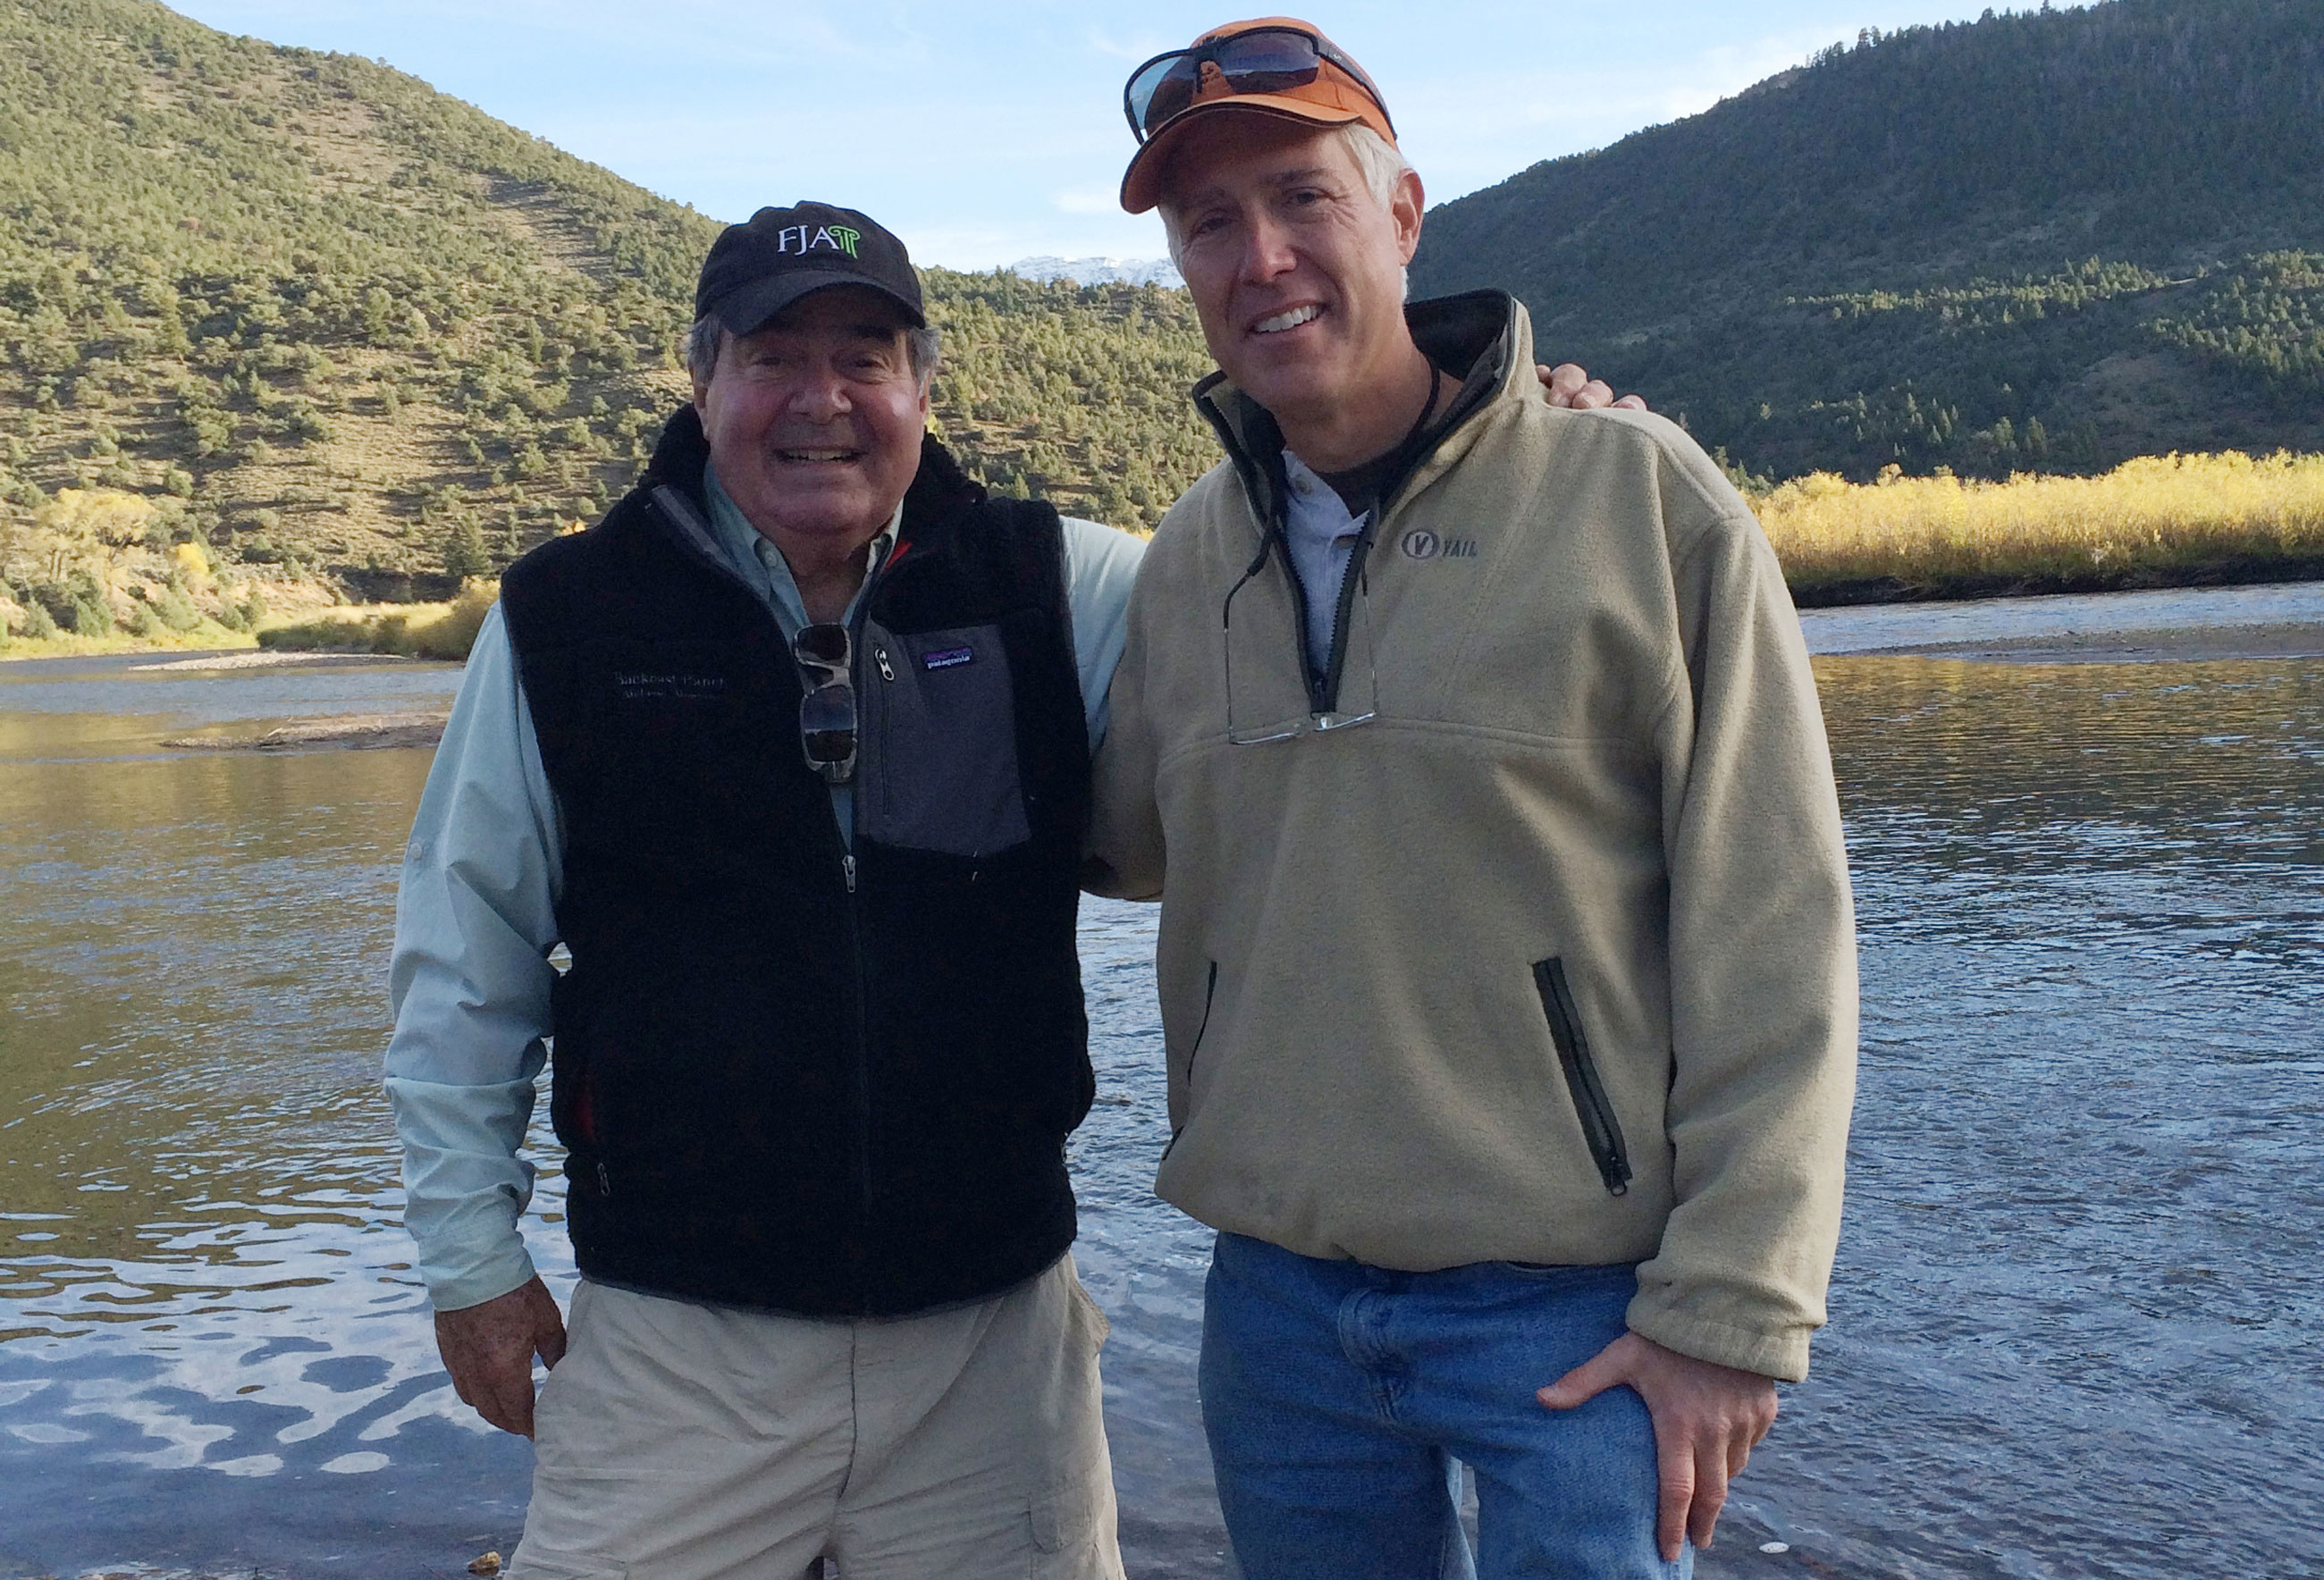 Justice Antonin Scalia and Judge Neil Gorsuch spend time by the Upper Colorado River in October 2014. (Photo: Handout/Reuters/Newscom)